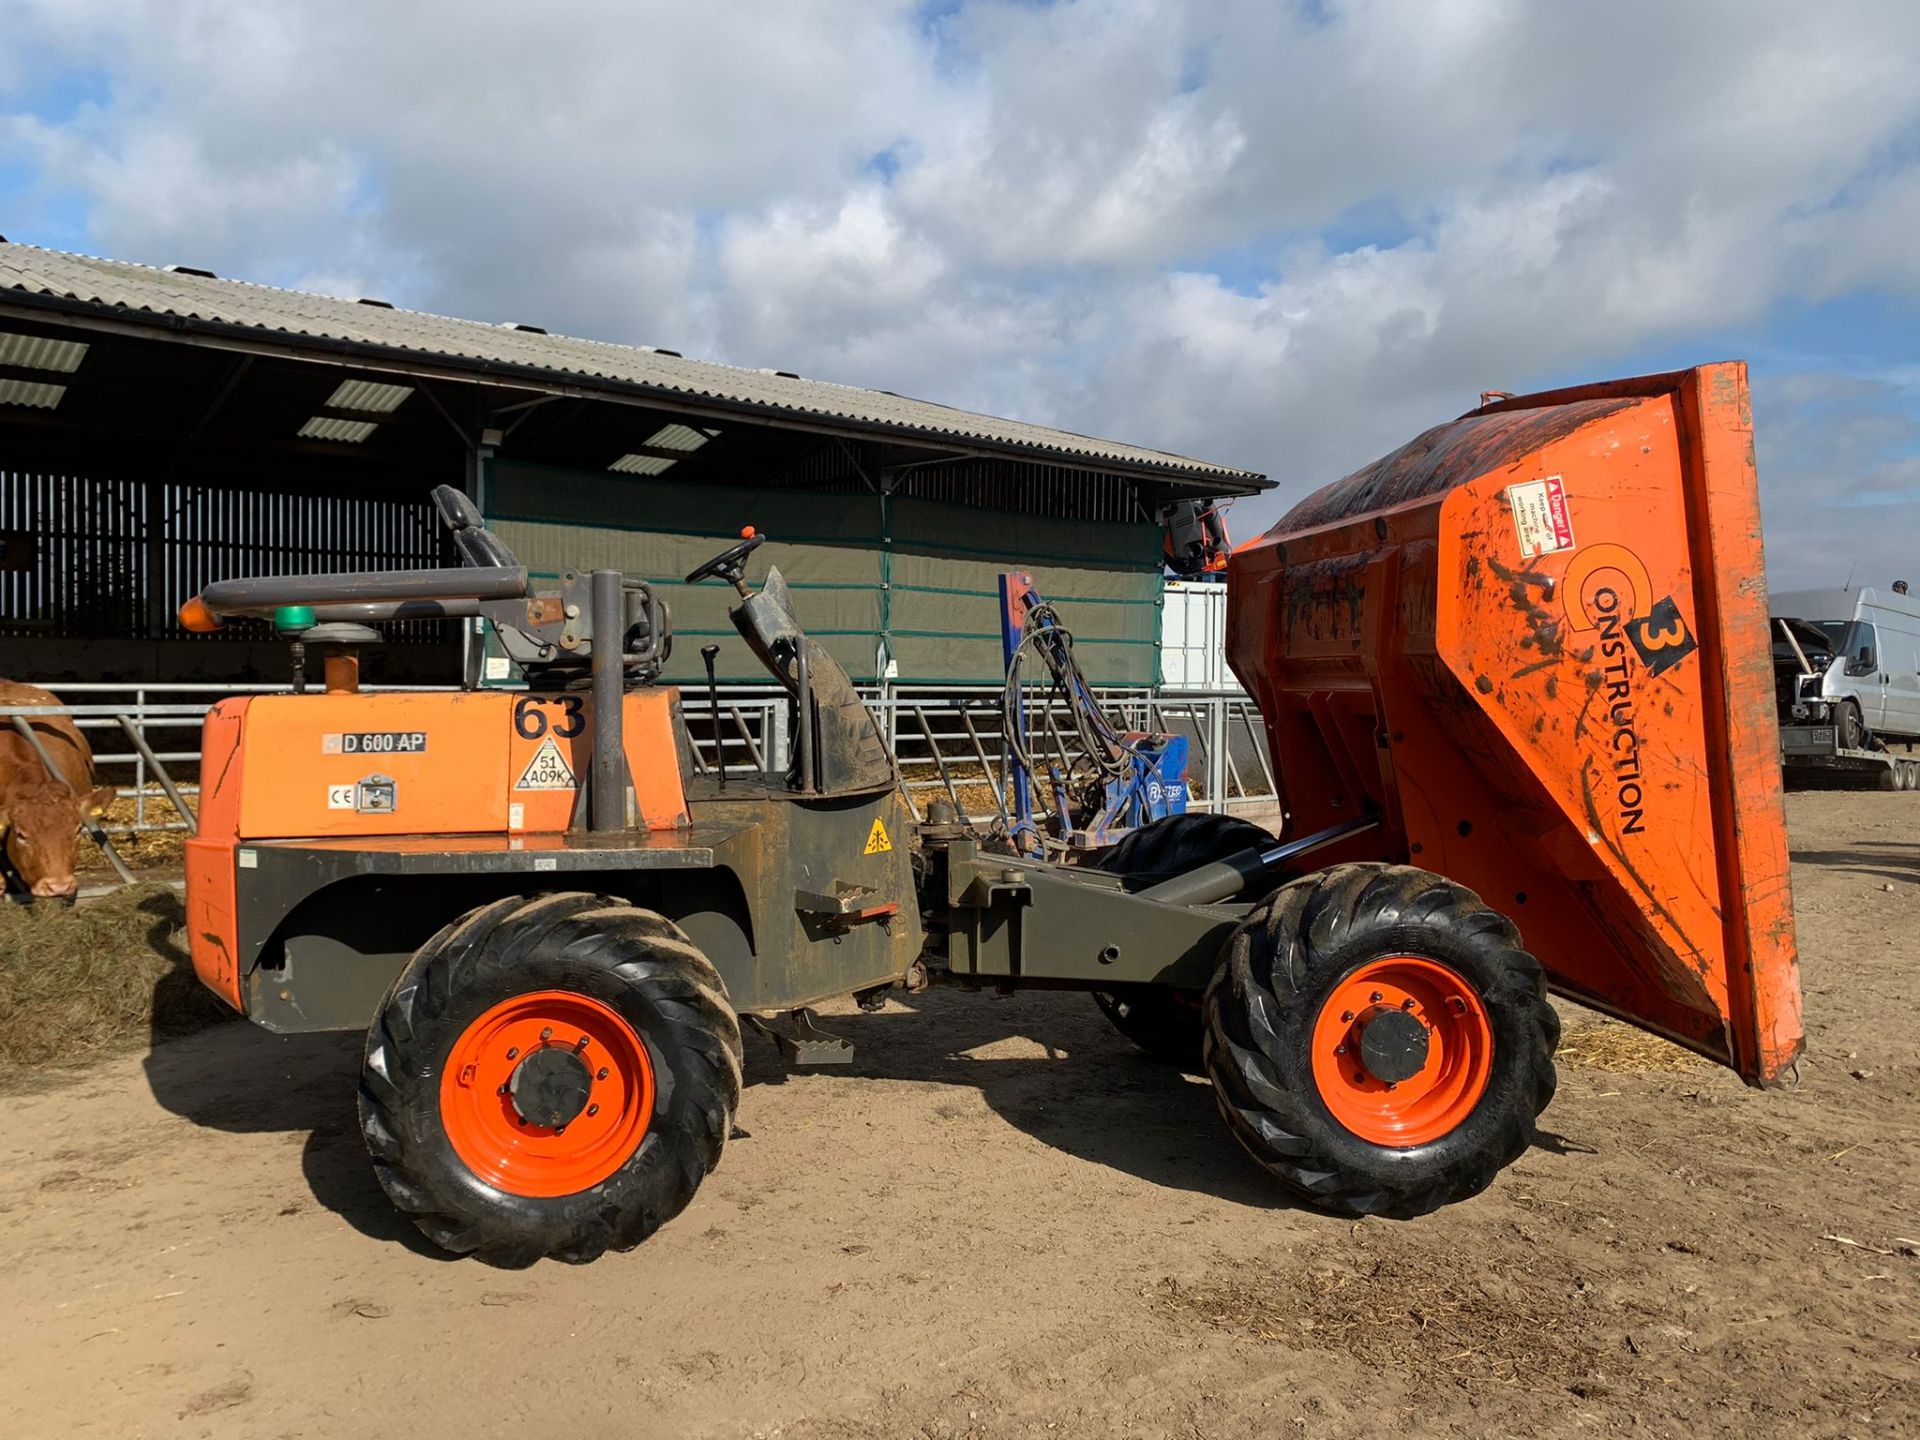 2016 AUSA D 600 AP 6 TON DUMPER, RUNS DRIVES AND TIPS, SHOWING A LOW AND GENUINE 1276 HOURS